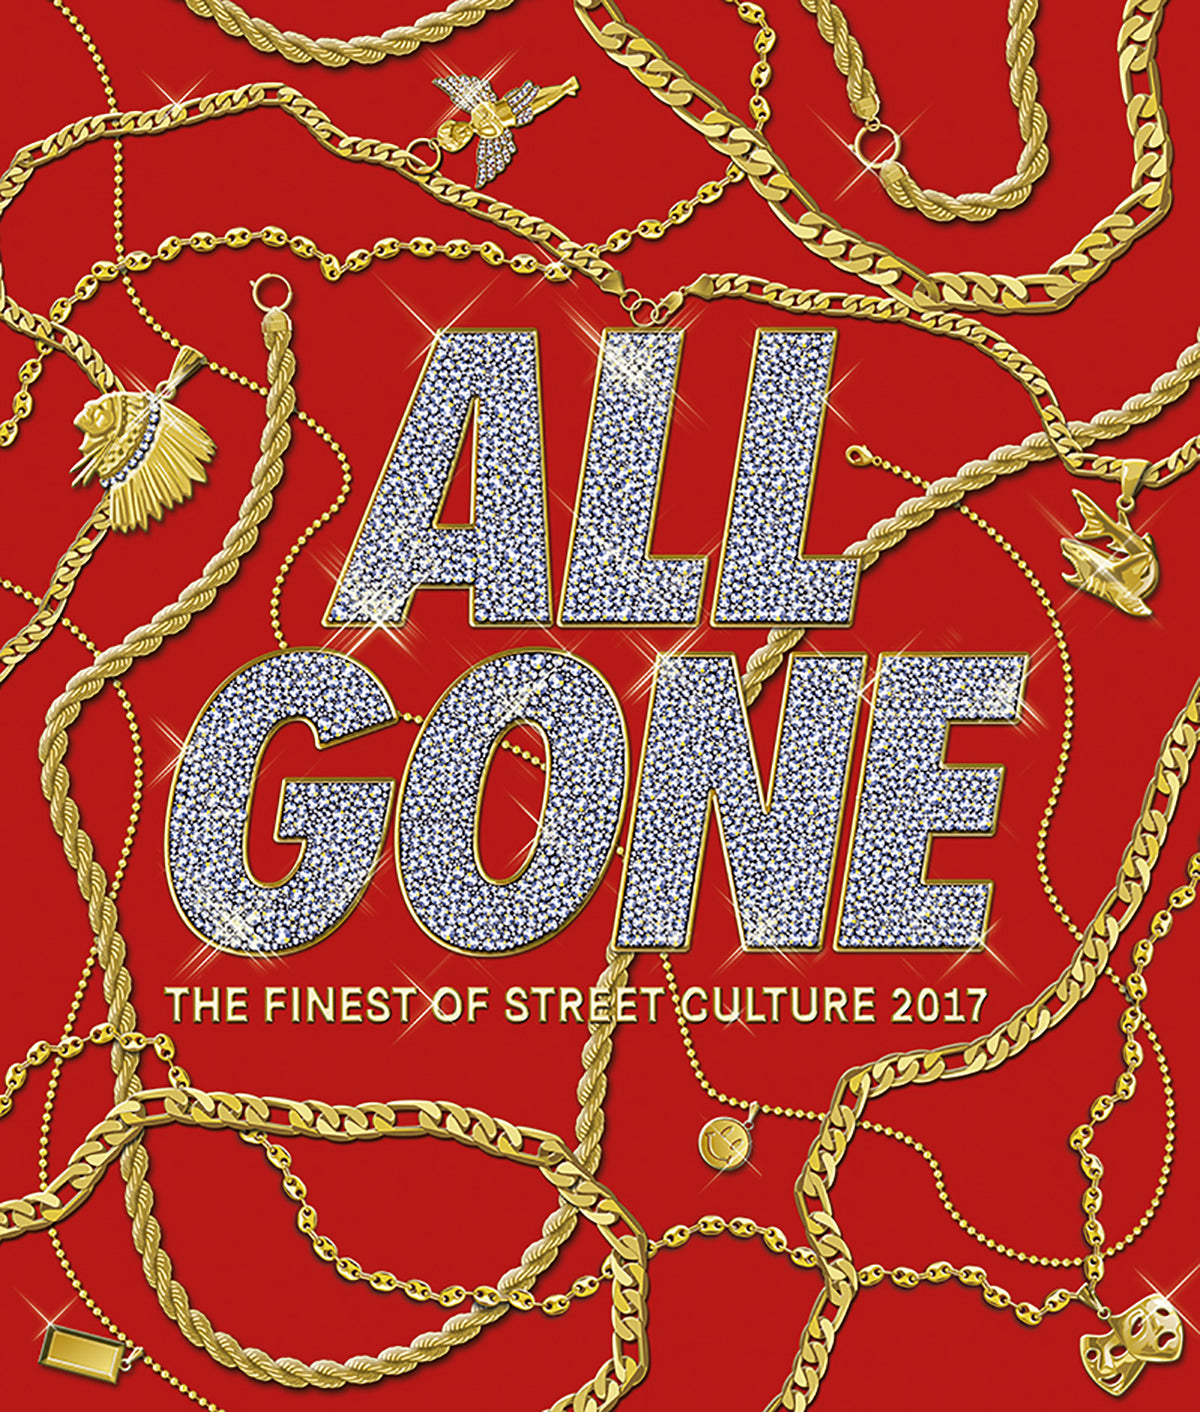 ALL GONE: The History Book on Street Culture